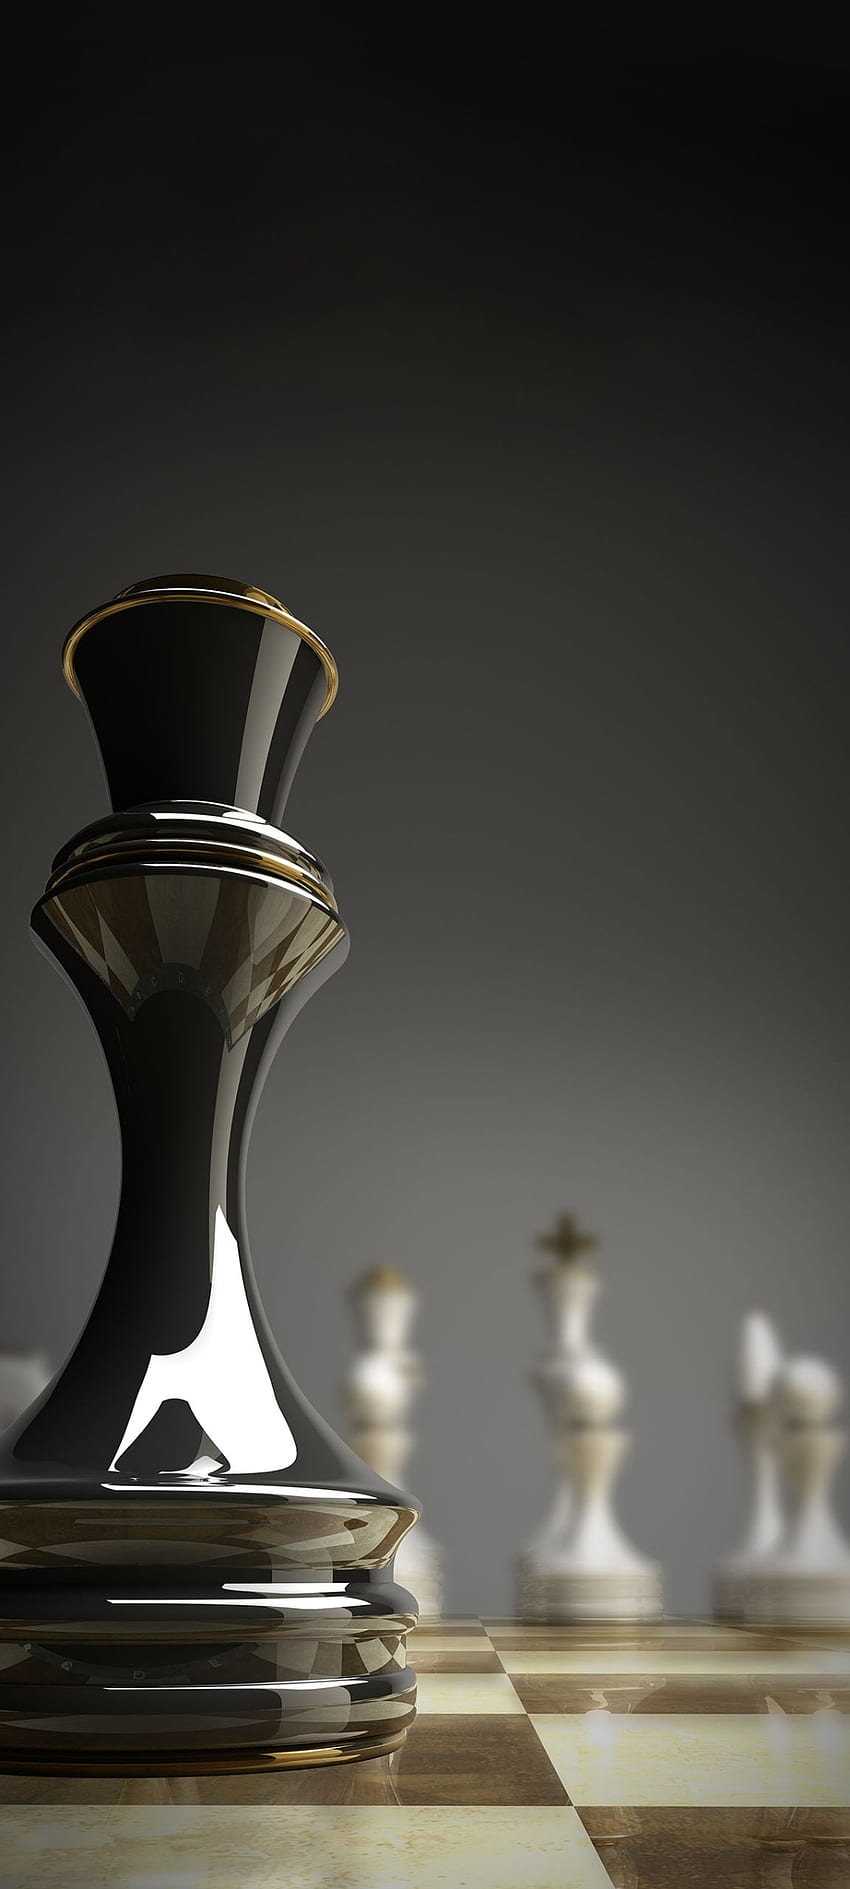 22,826 Chess Stock Video Footage - 4K and HD Video Clips | Shutterstock